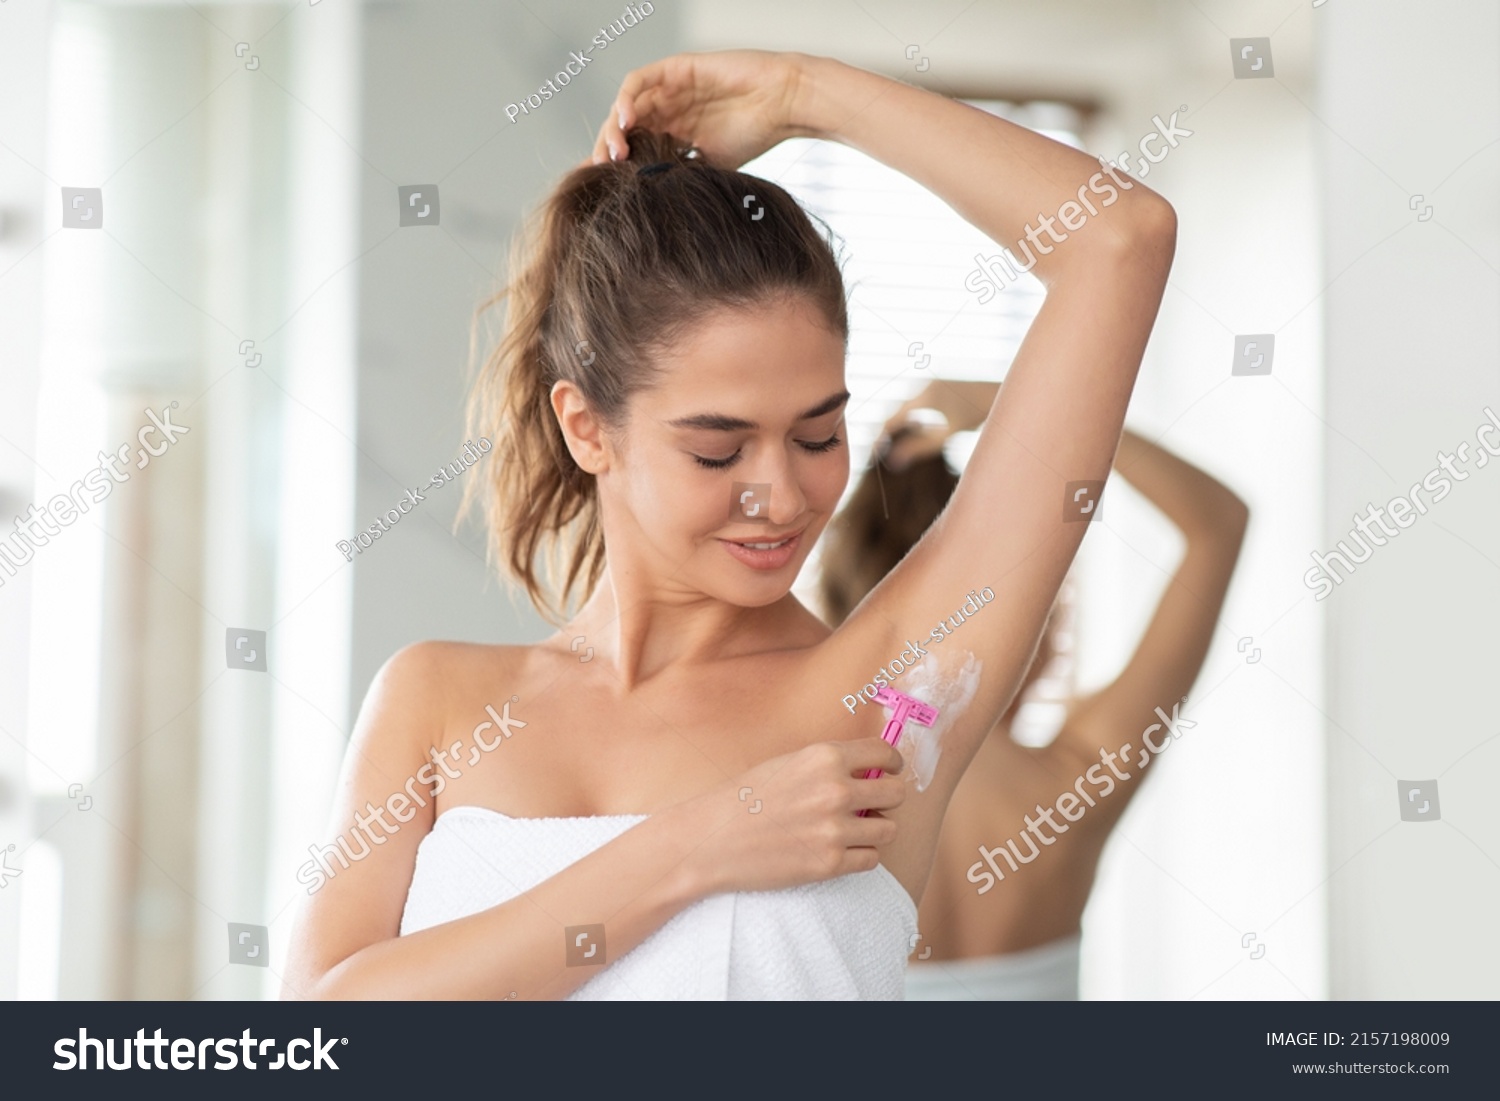 Young Lady Shaving Armpits Covered With Foam Removing Hair Standing Wrapped In Towel In Modern Bathroom. Woman Raising Arm Making Underarms Depilation. Hair Removal Concept #2157198009